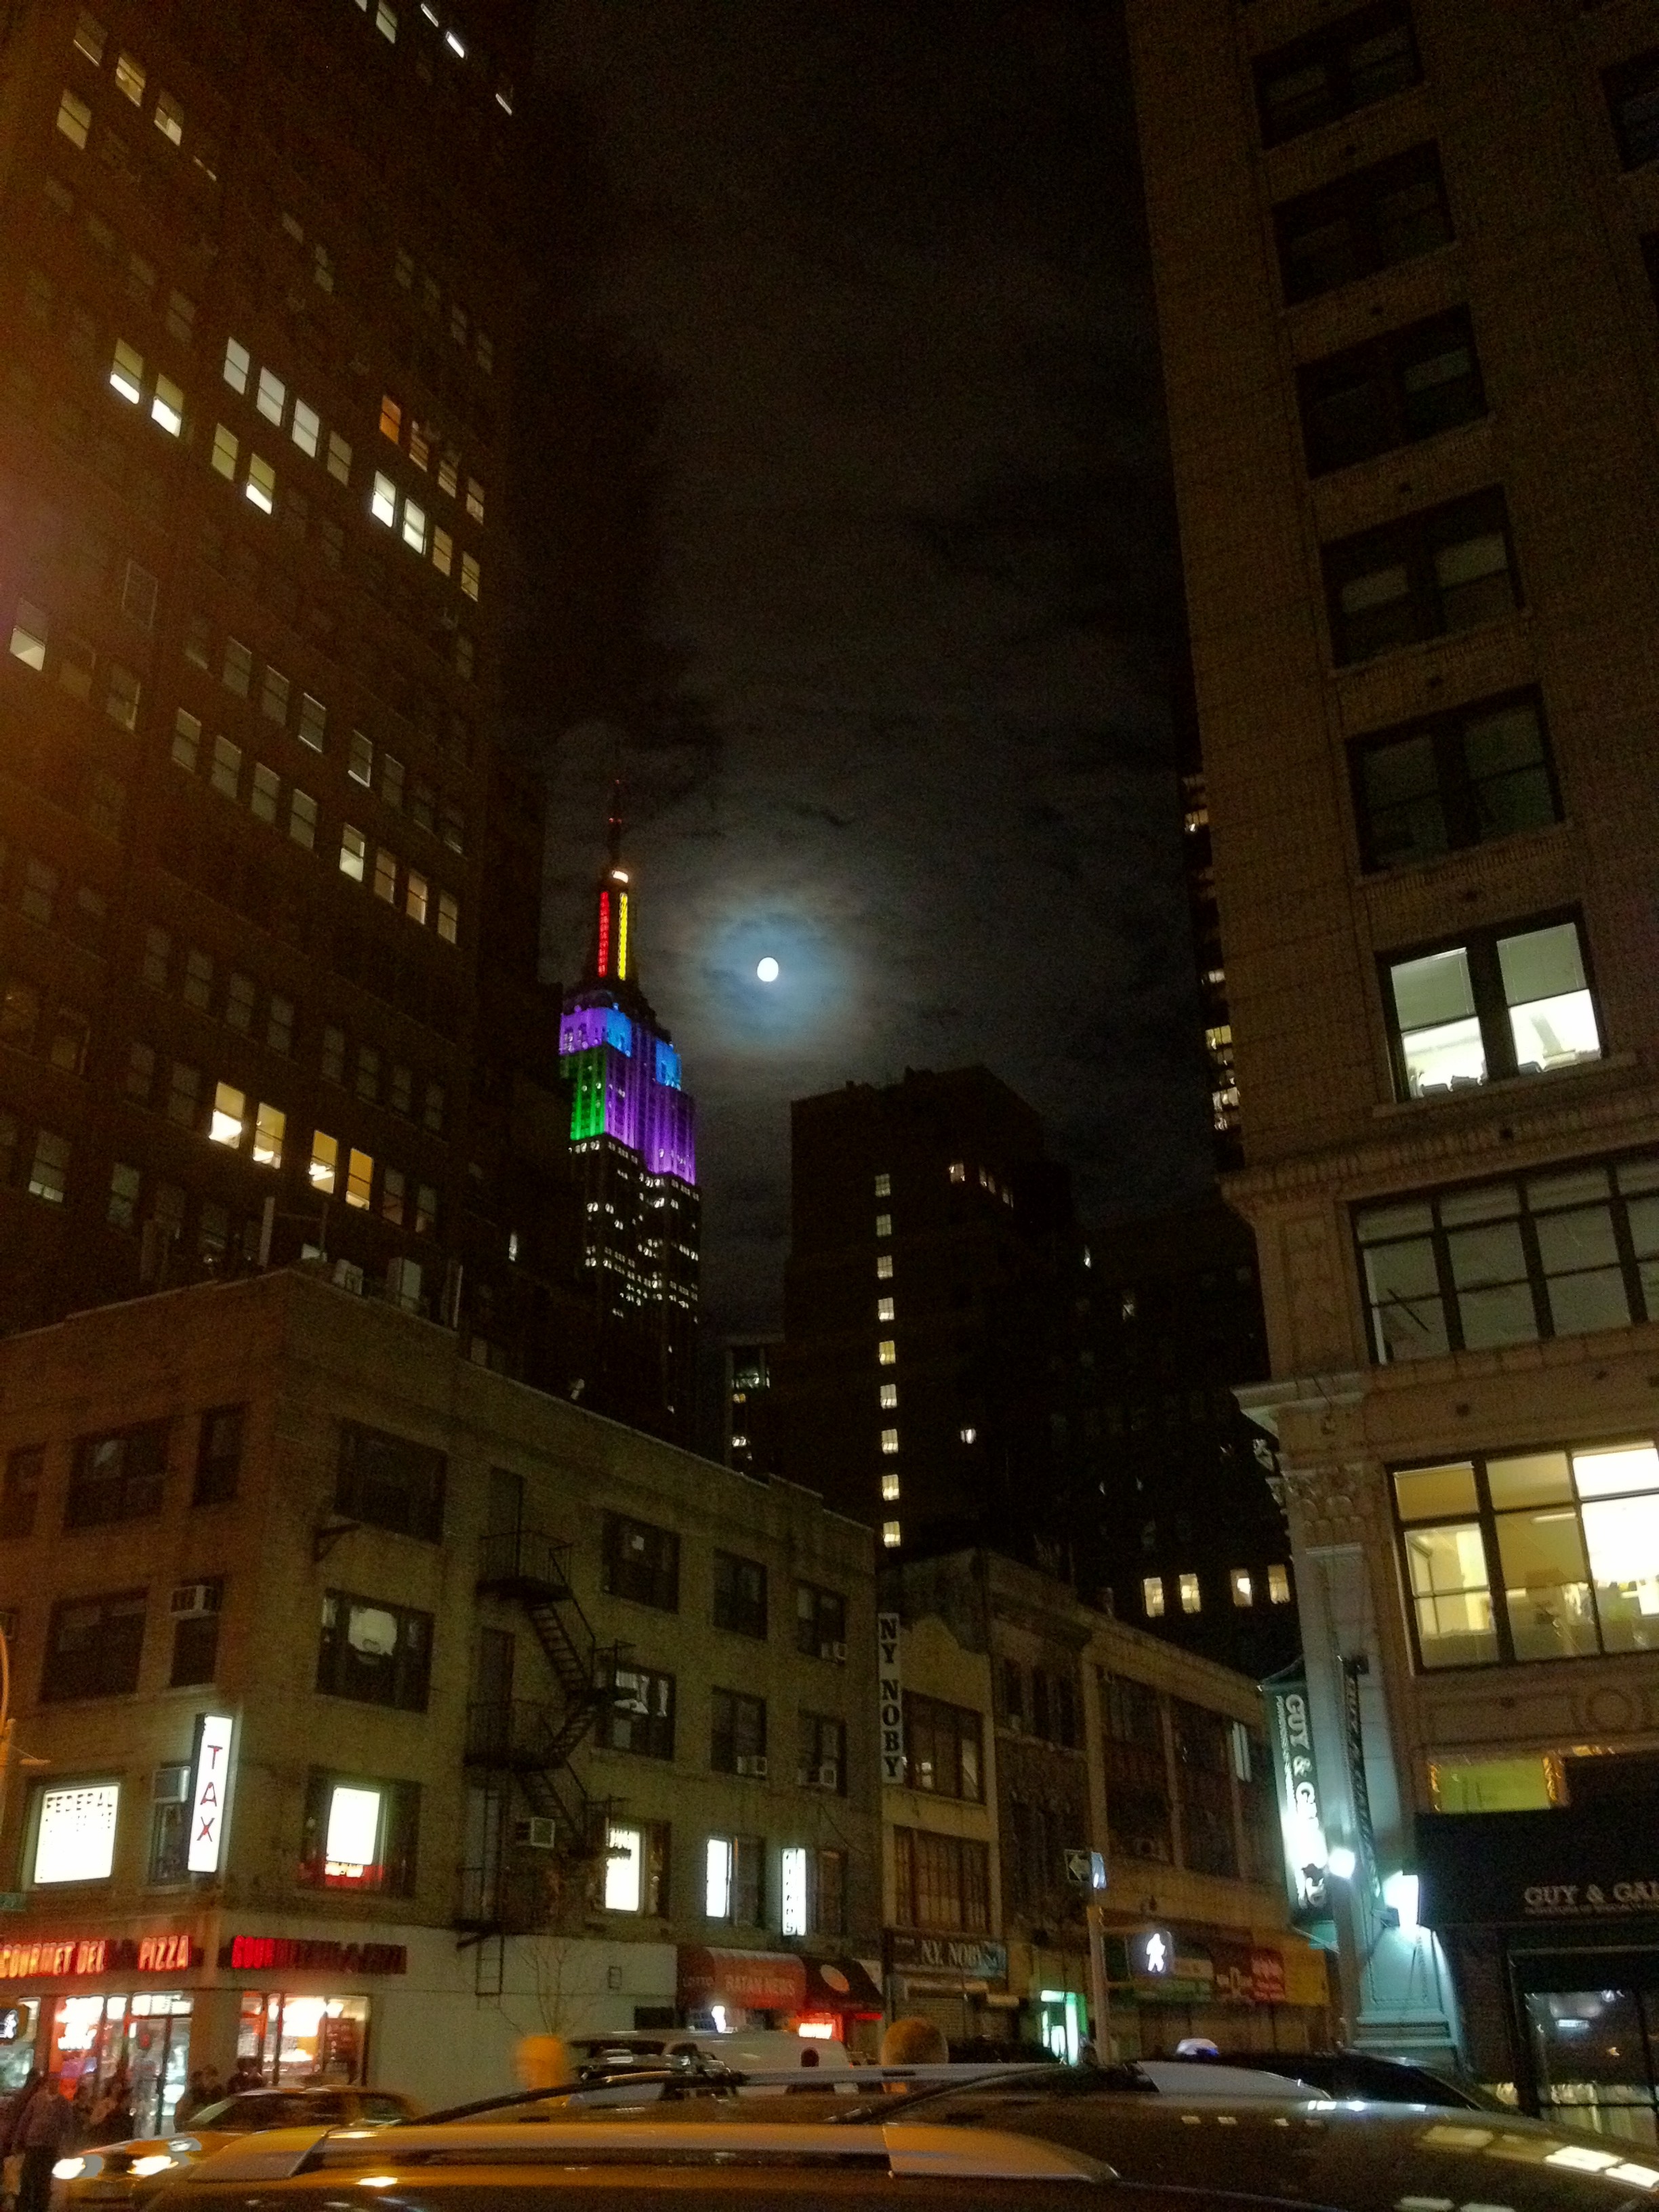 Cool picture of an almost full moon and the Empire State Building